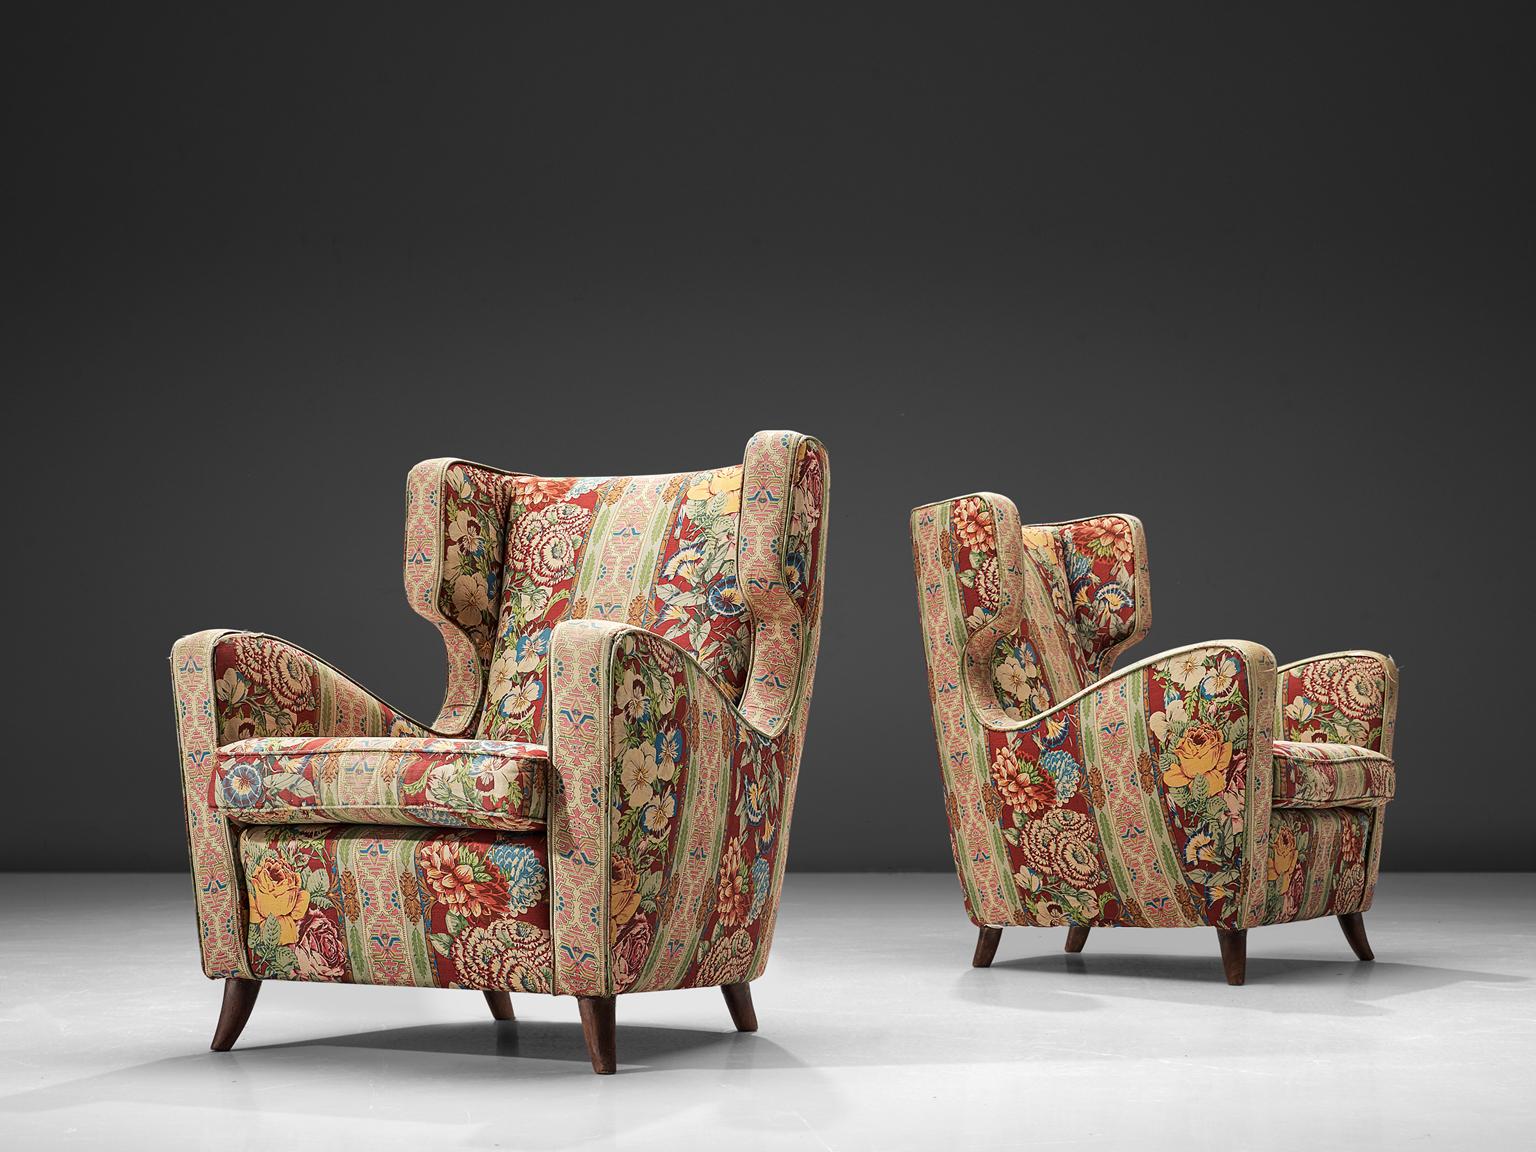 Melchiorre Bega ‘attributed’ two lounge chairs, fabric, wood and brass, Italy, 1940s.

This wonderful pair of elegant and small wingback chairs are upholstered with a colorful, bold floral fabric. The edges and corners of these chairs are very